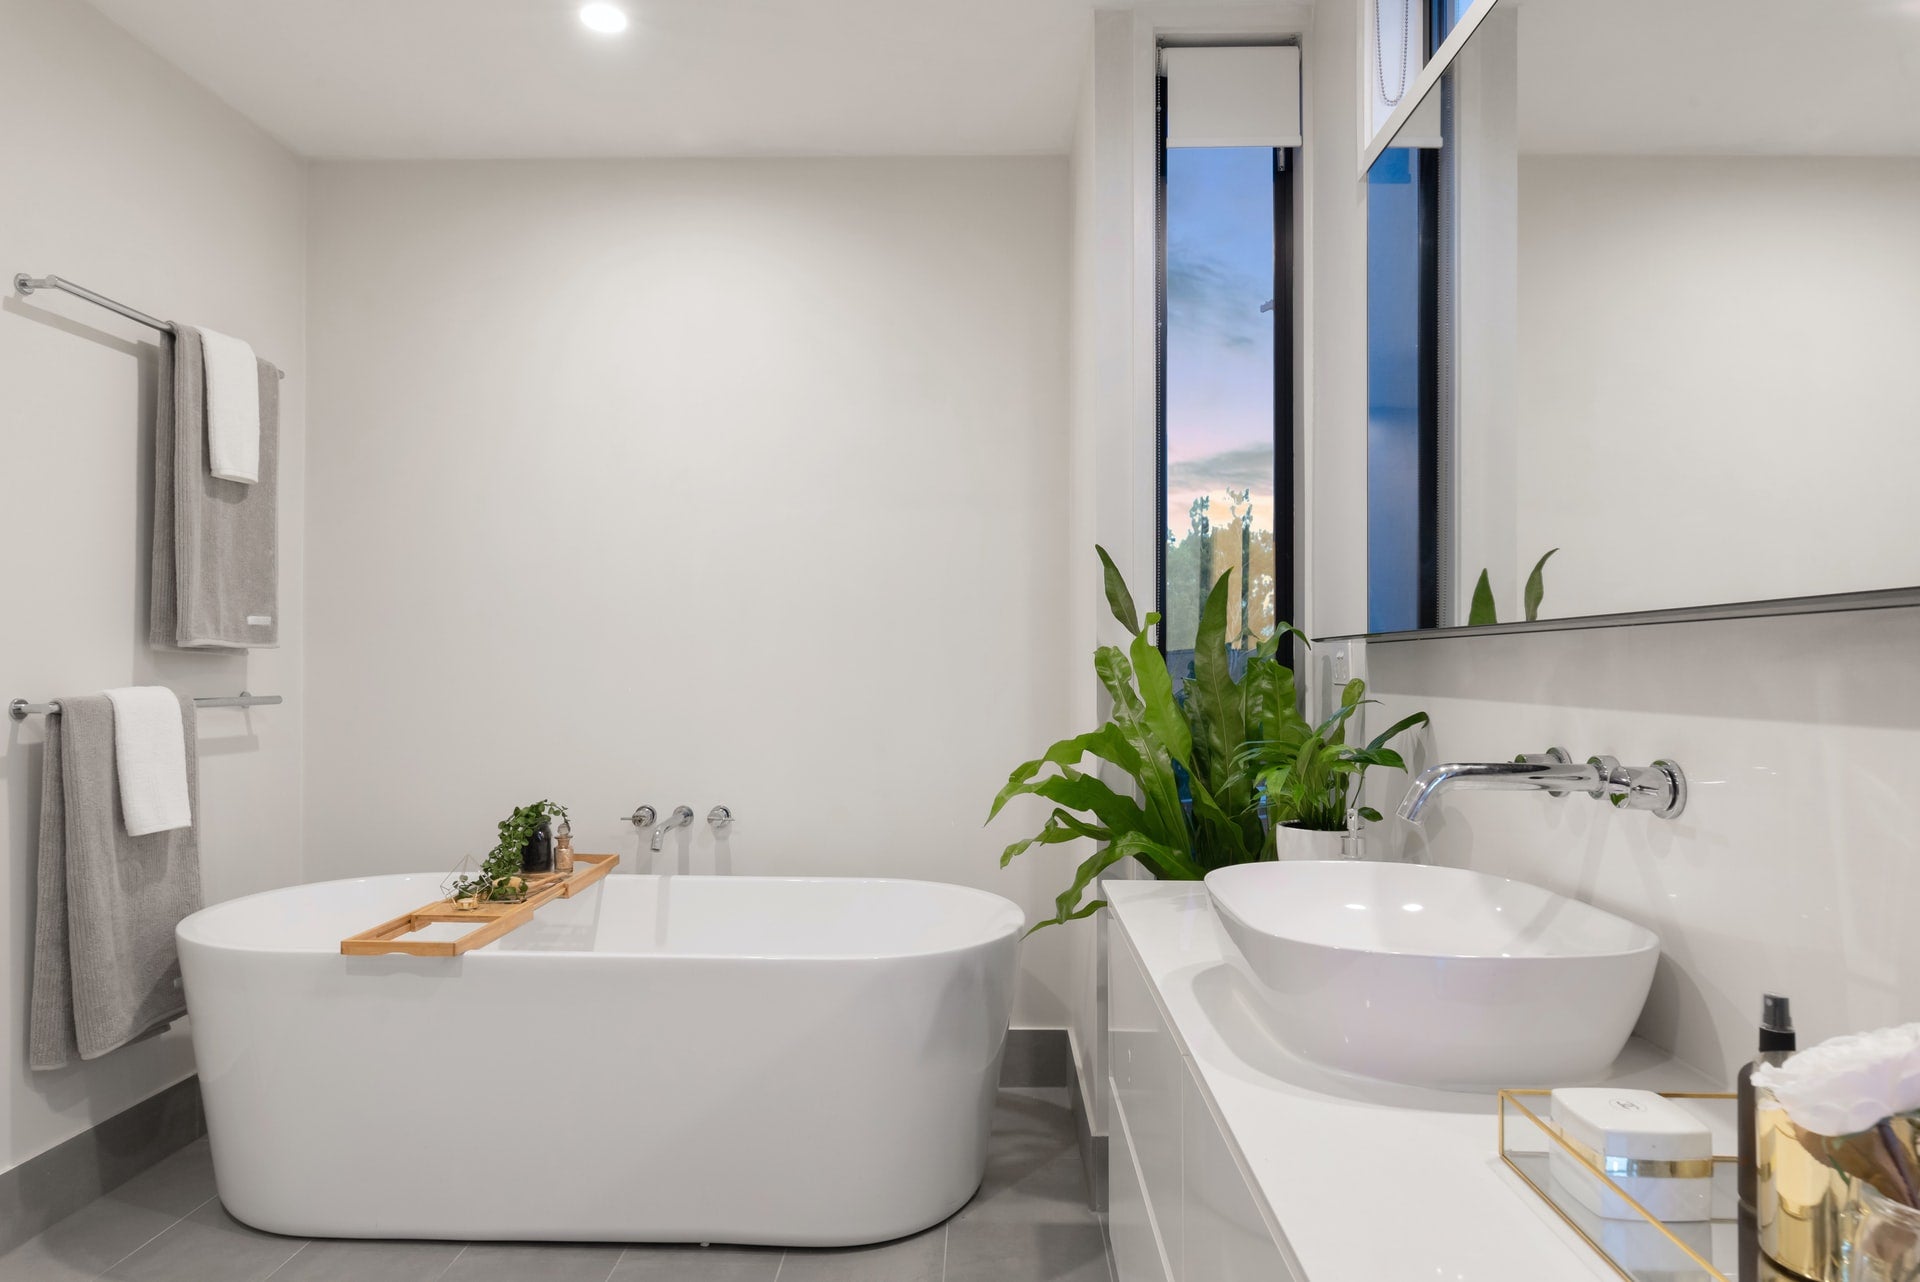 Your Handy Guide To Selecting The Right Bathtub